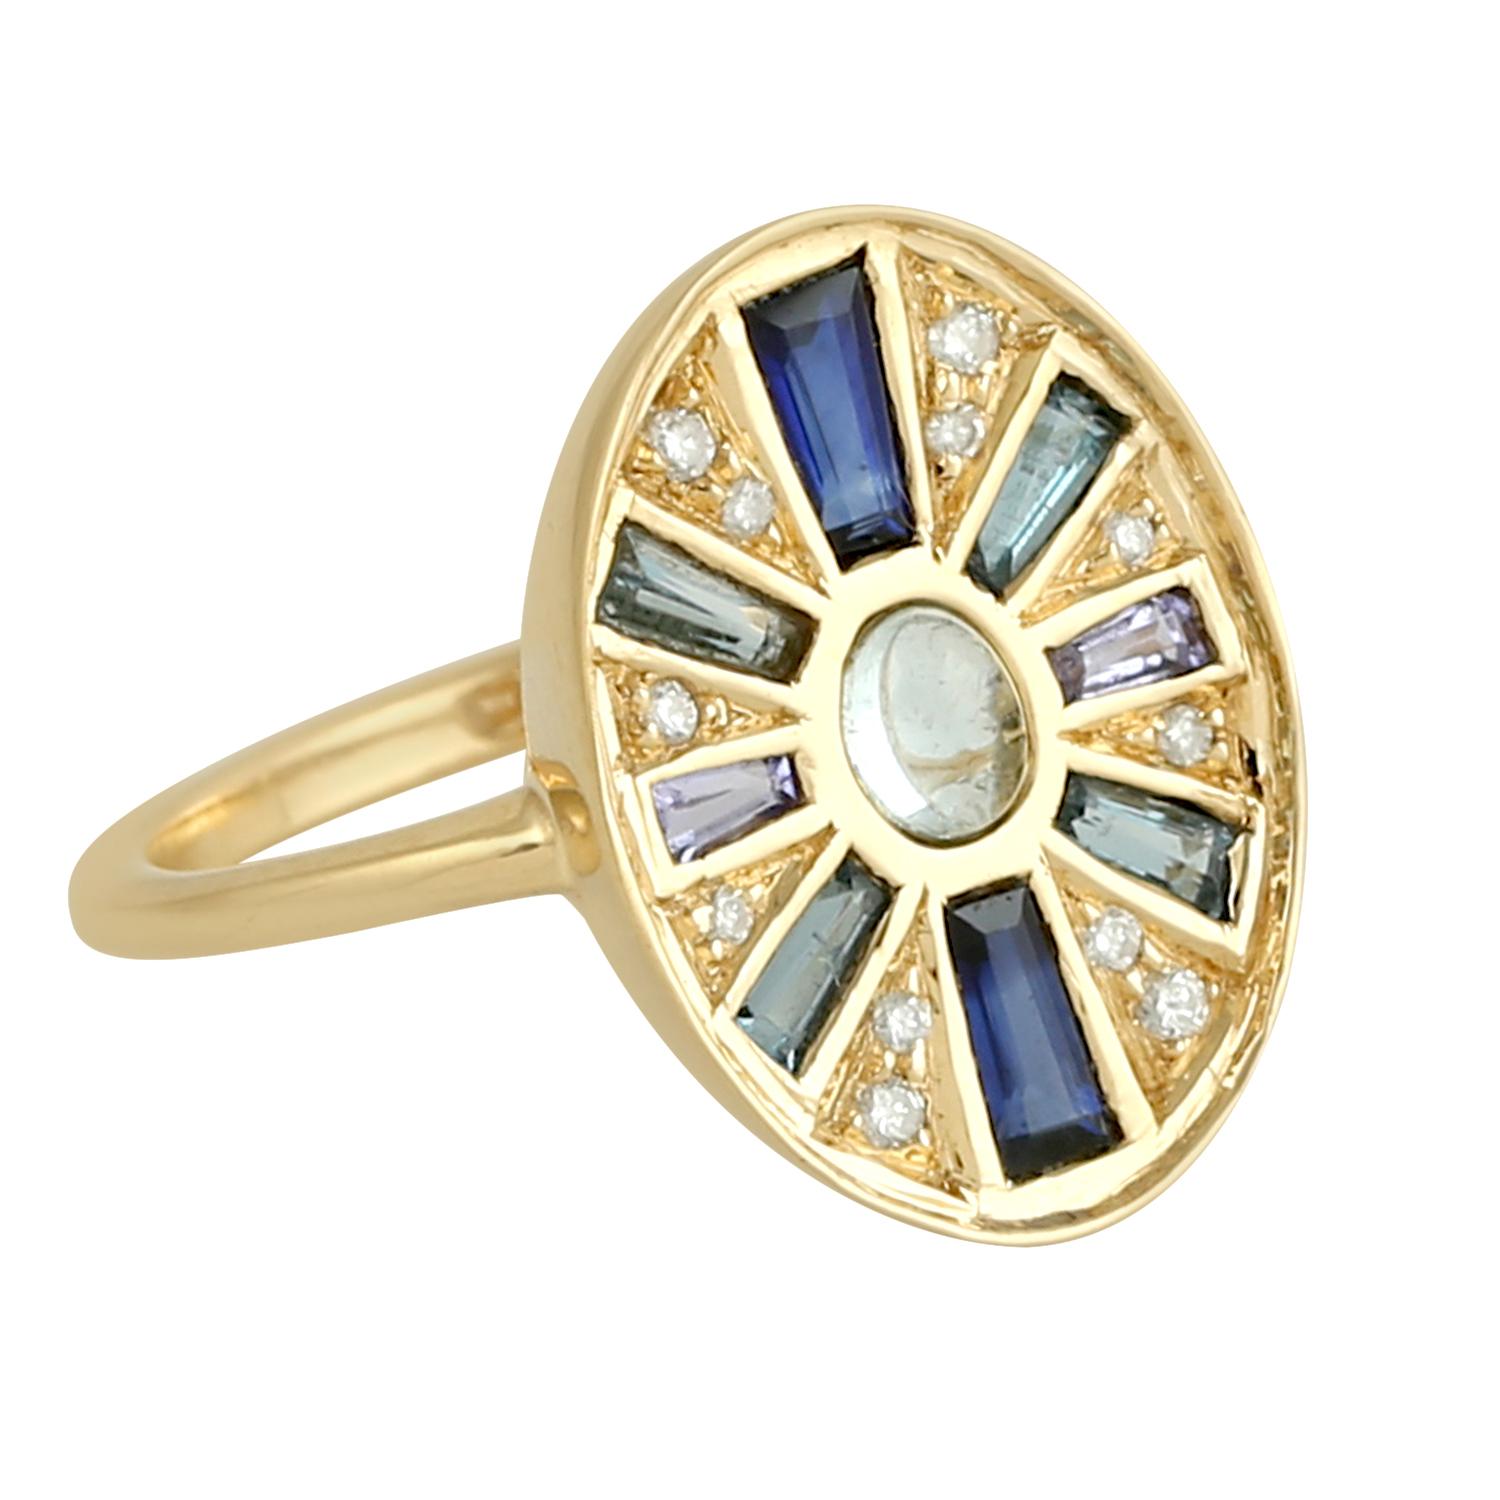 Mixed Cut Multi Gemstone Ring With Diamonds Made In 18k Yellow Gold For Sale